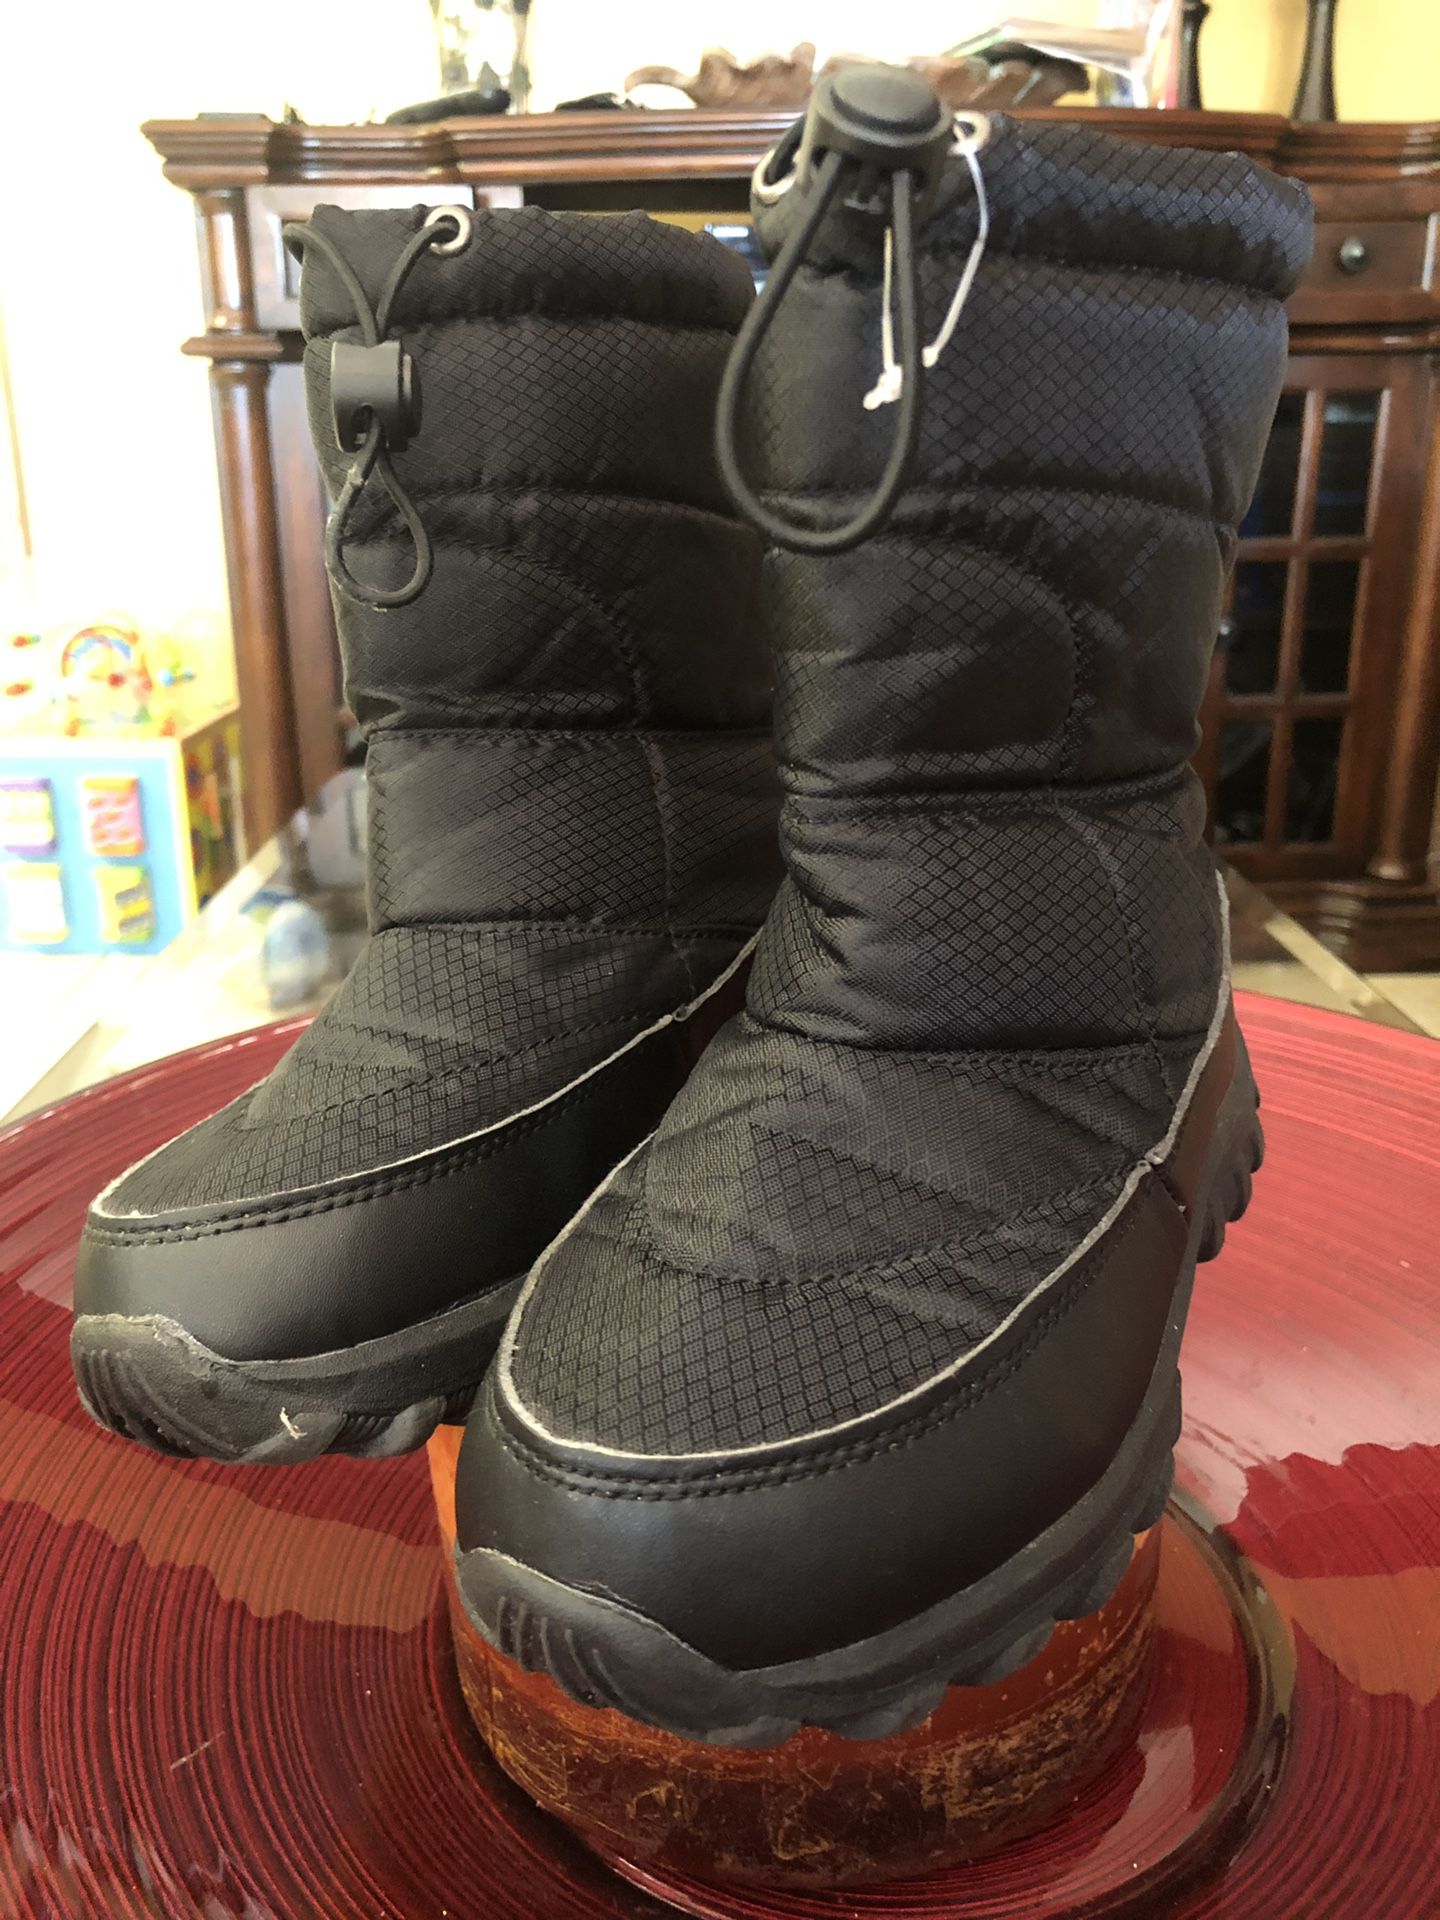 Itasca Kids Snow Boots size 3y